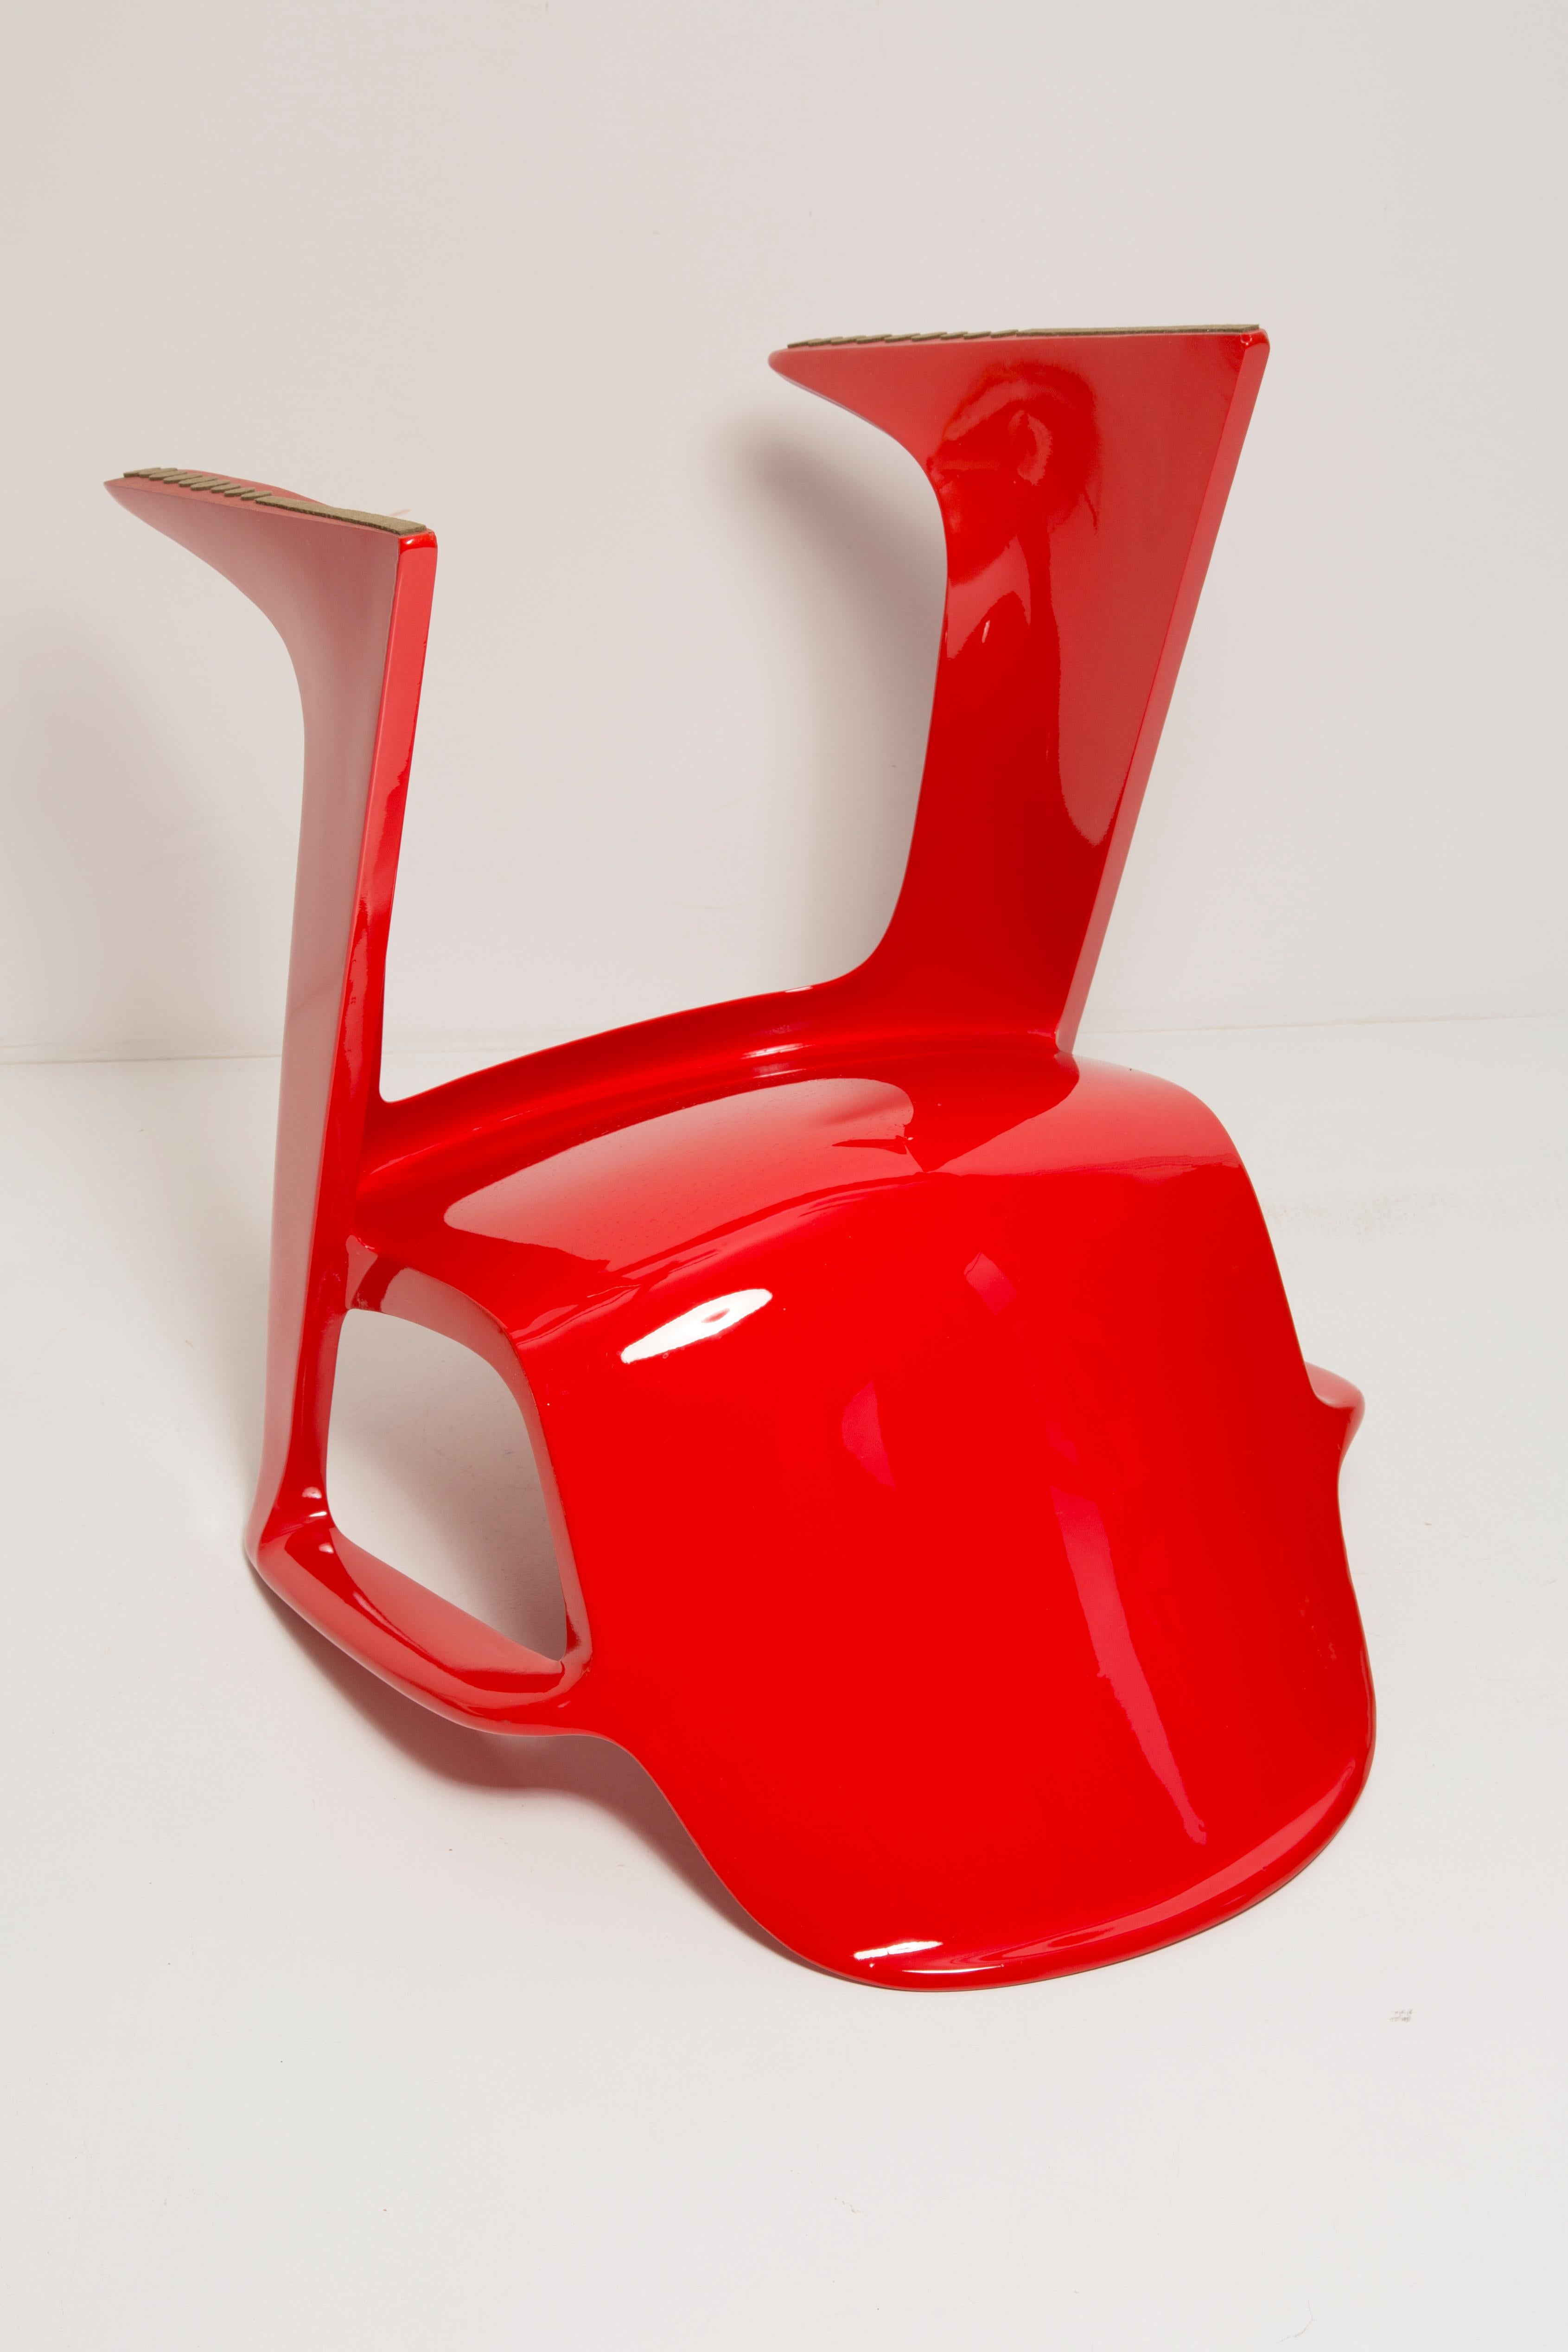 Midcentury Signal Red Kangaroo Chair Designed by Ernst Moeckl, Germany, 1968 For Sale 8